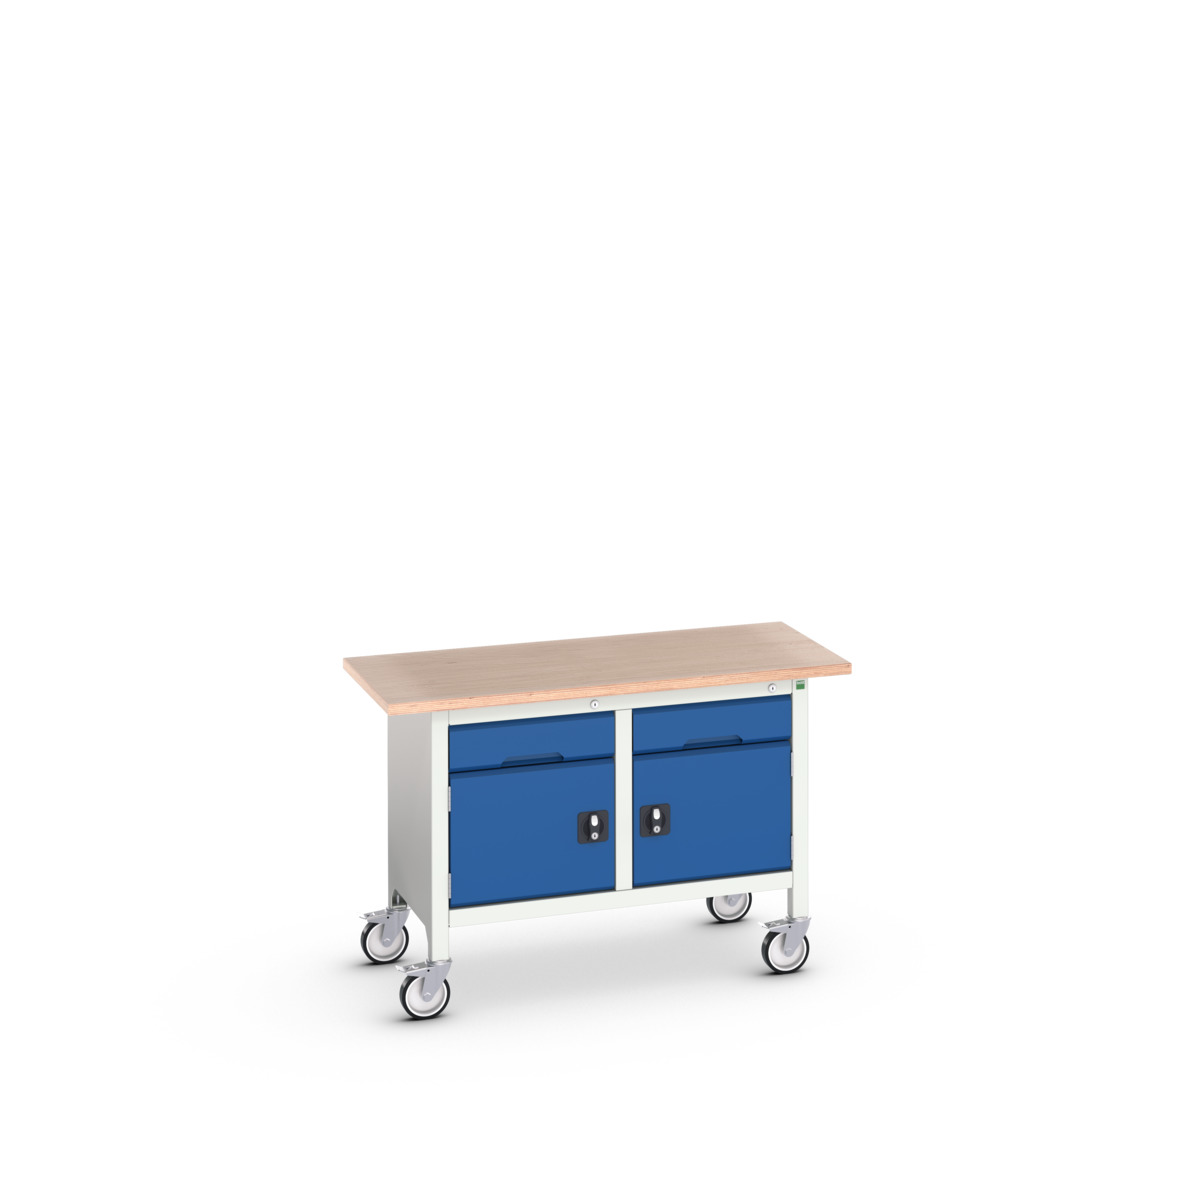 16923201.11 - verso mobile storage bench (mpx)